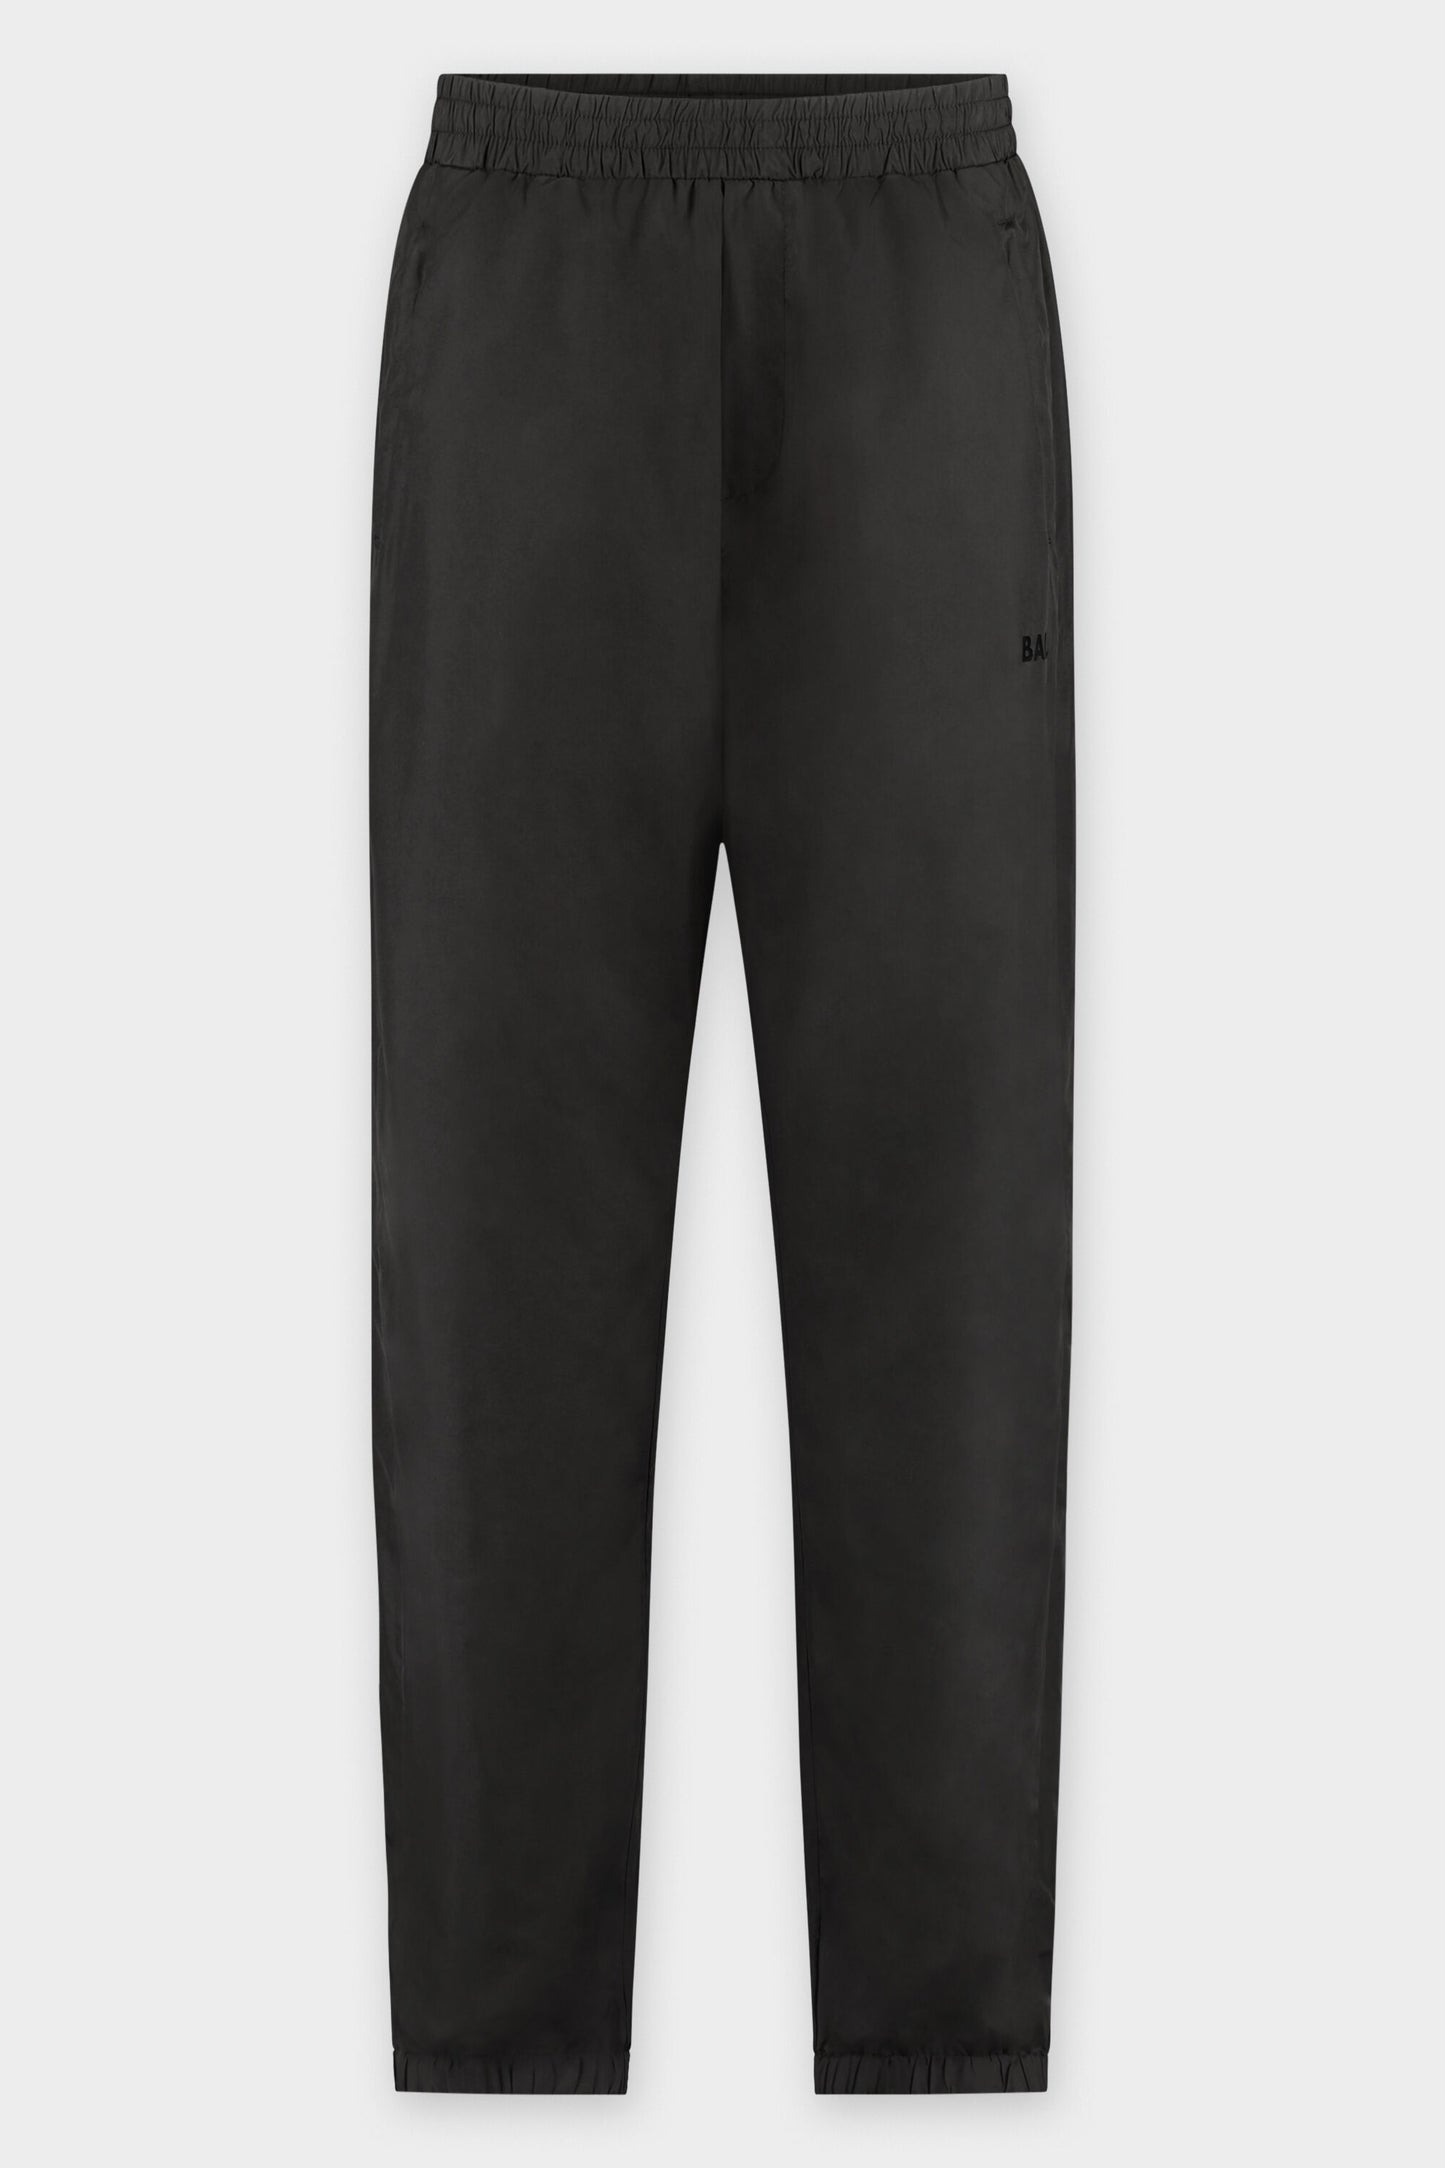 Buy Louis Philippe Men Black Solid Casual Track Pants at Redfynd